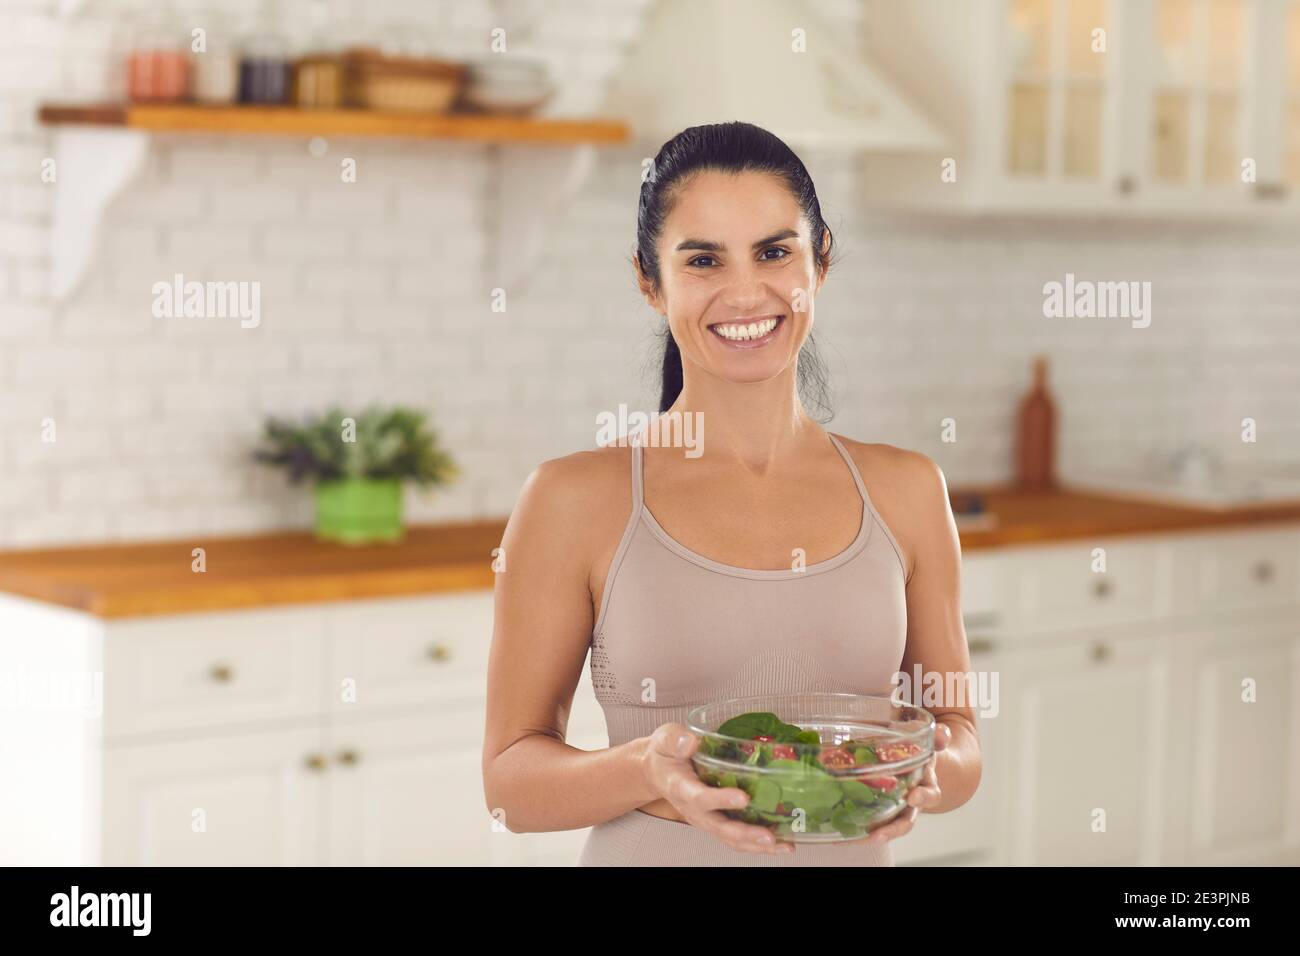 Portrait of slim woman in sports top holding bowl of vegetable salad and smiling at camera Stock Photo